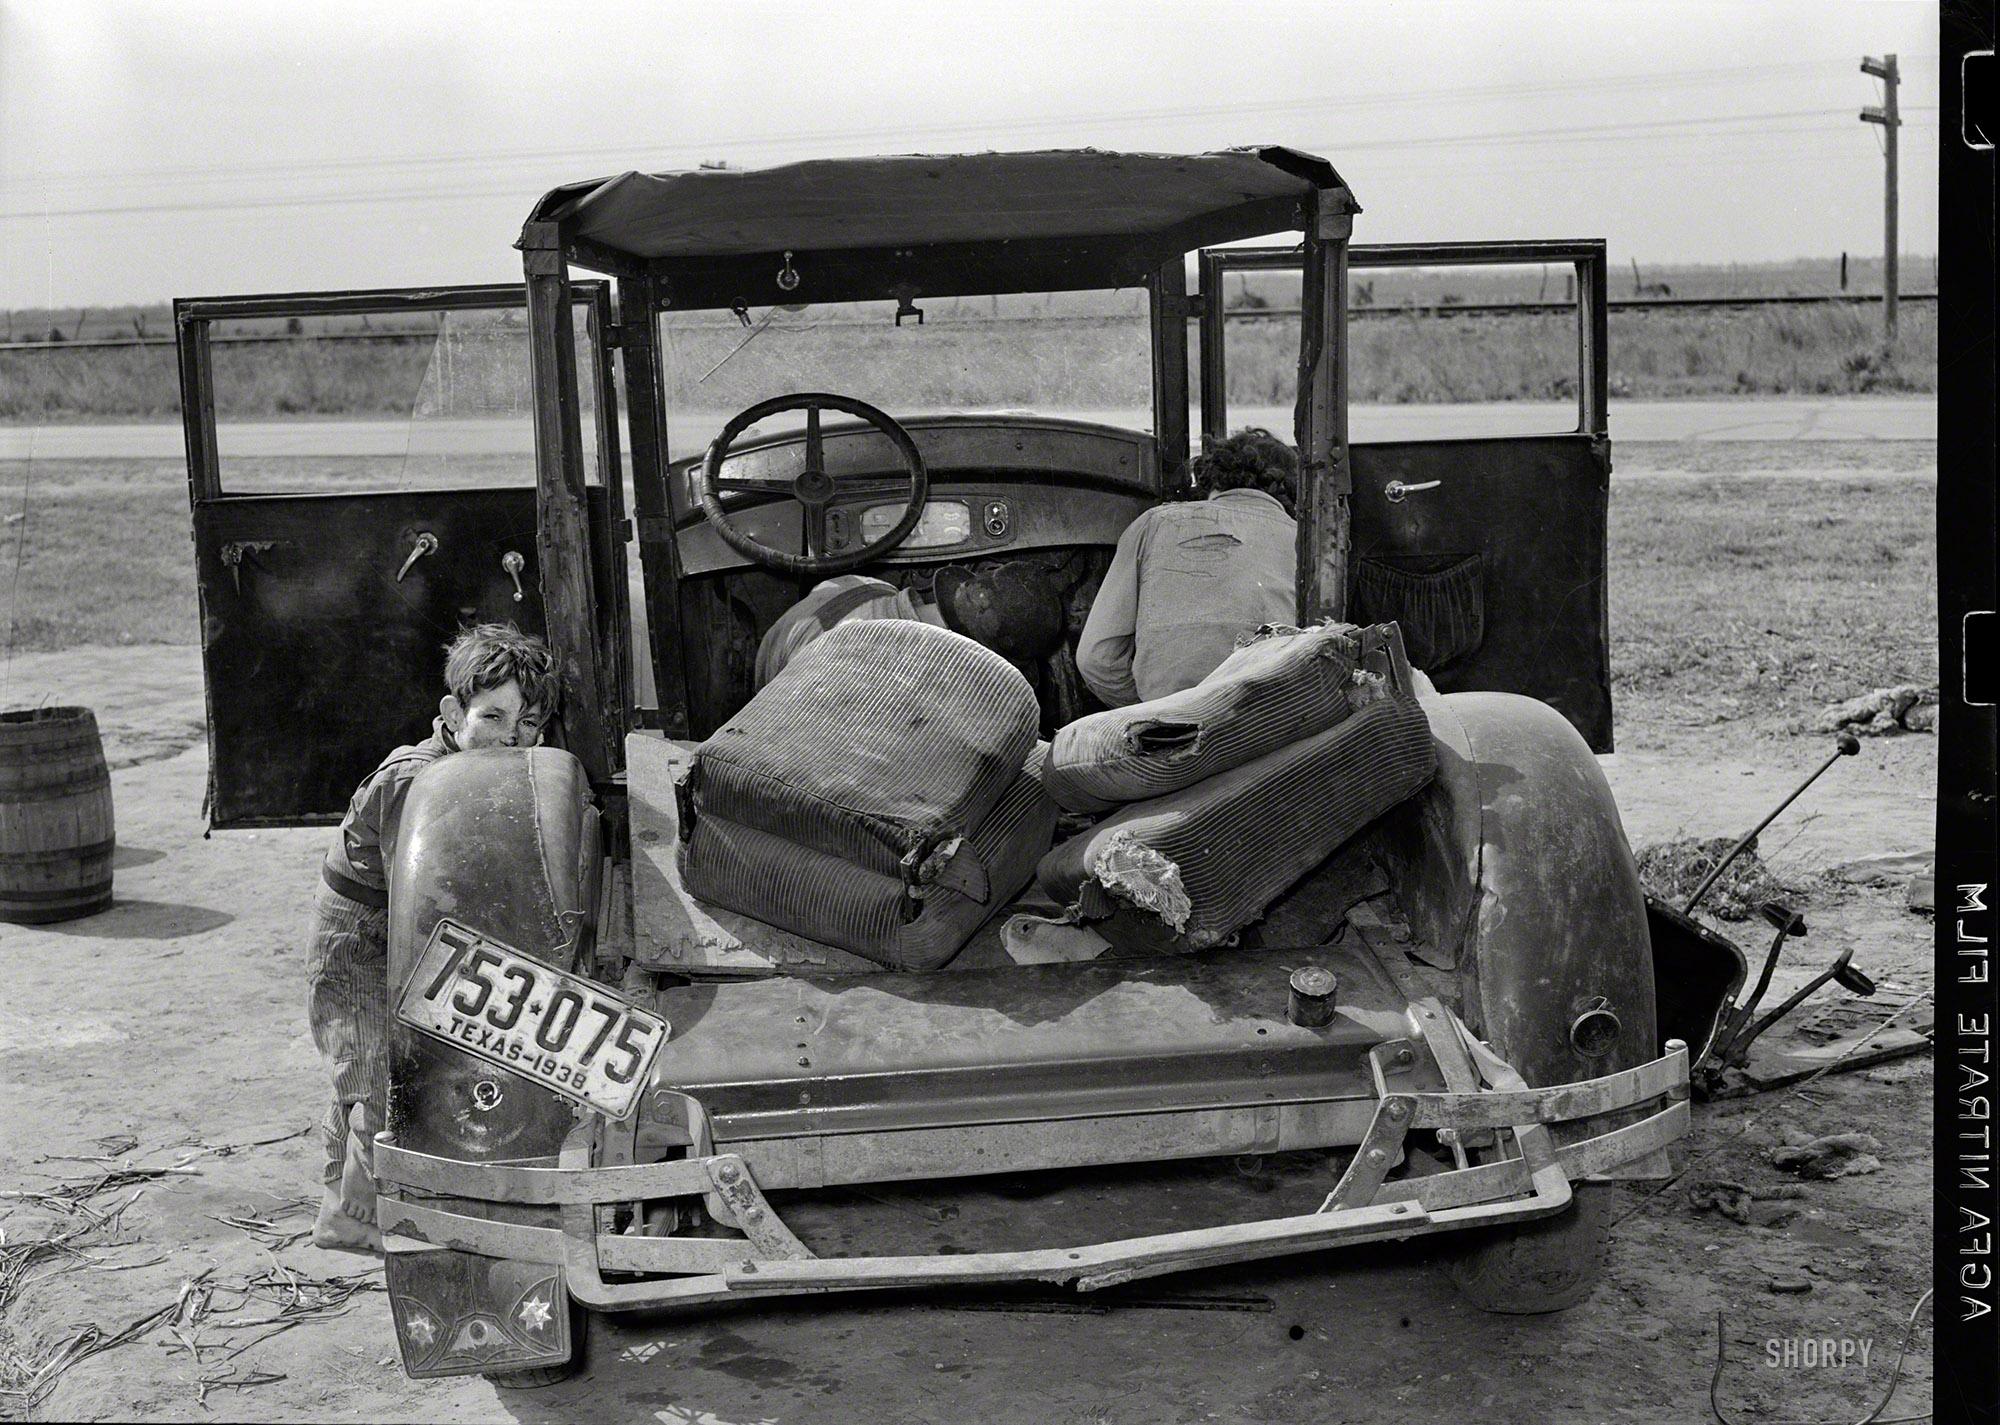 February 1939. "White migrant and wife repairing clutch in their car near Harlingen, Texas." On the road during the Depression. Medium-format nitrate negative by Russell Lee for the Resettlement Administration. View full size.